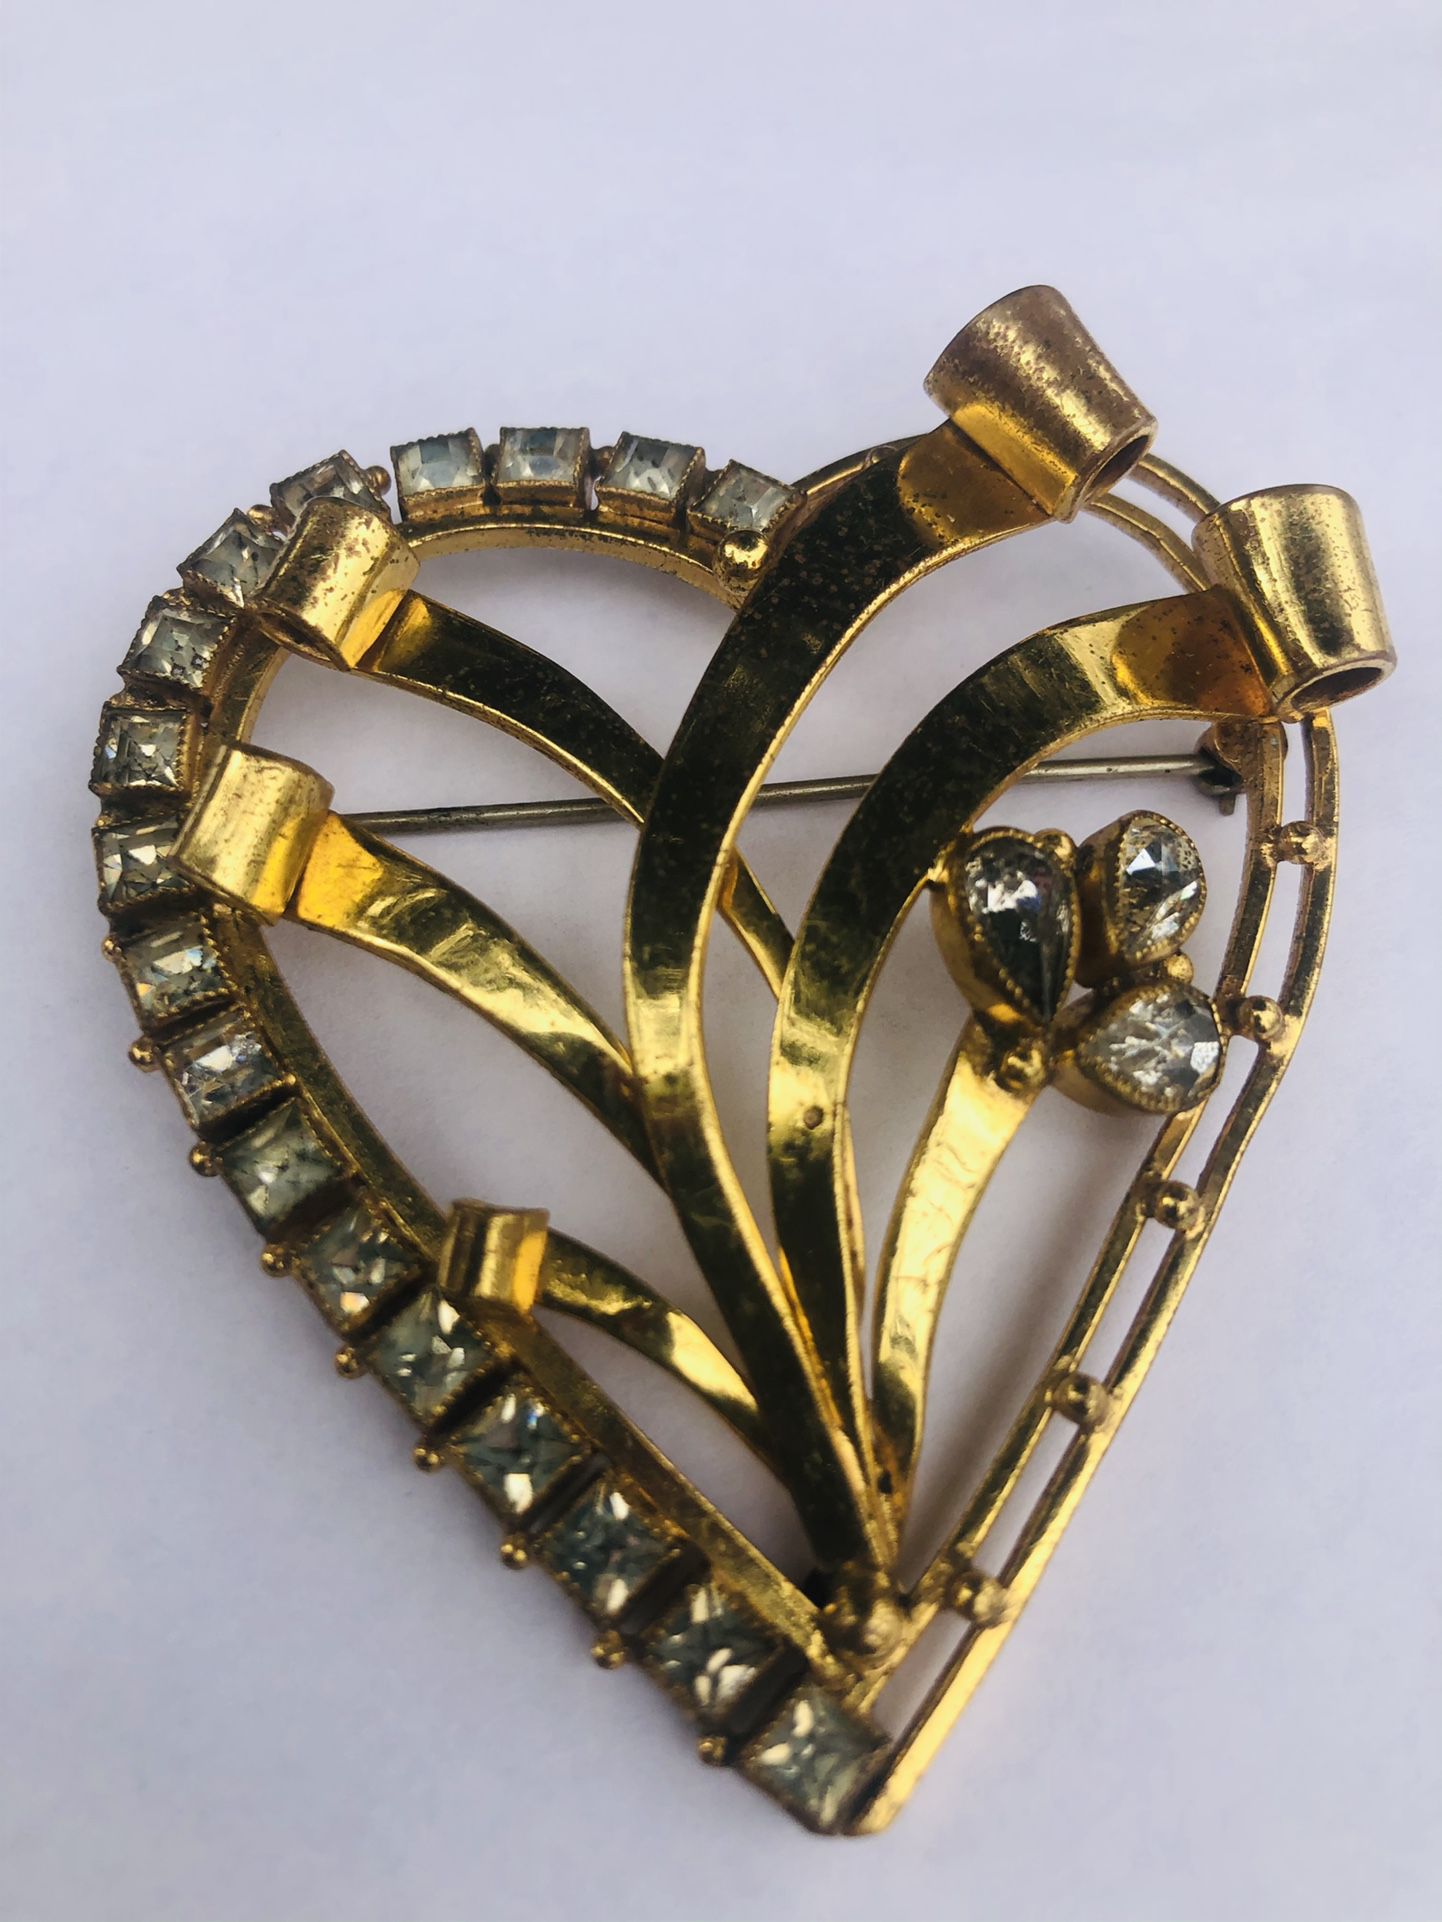 Vintage Gold Tone Large Heart Shape Brooch Pin 3 inch By 2 inch Rhinestones